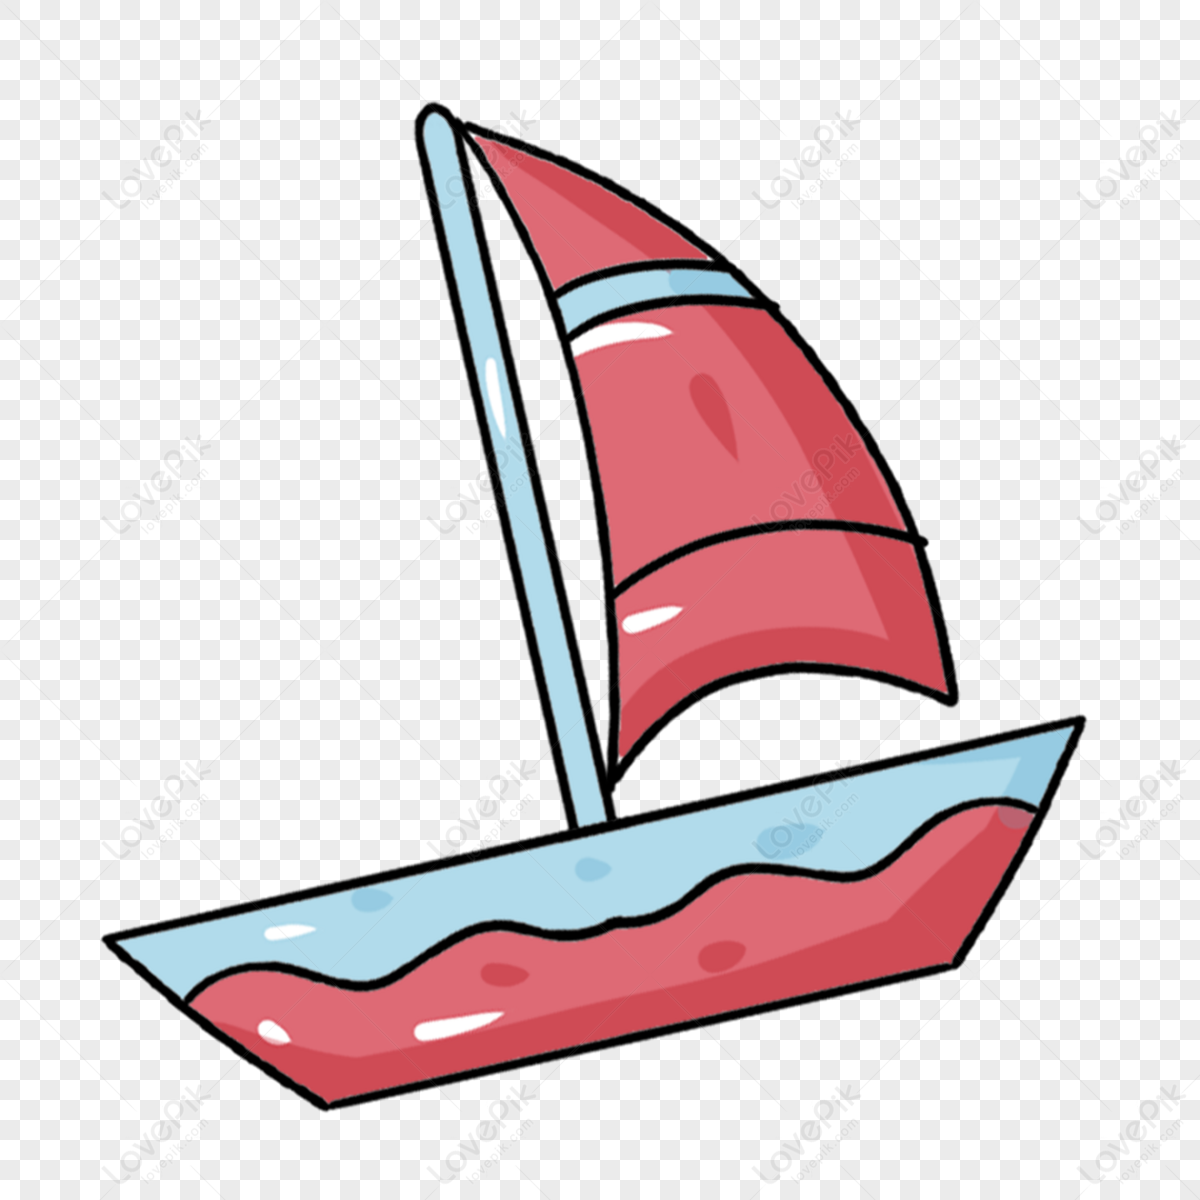 Red hand drawn cartoon sailboat,hand drawing,doodle,blue png image